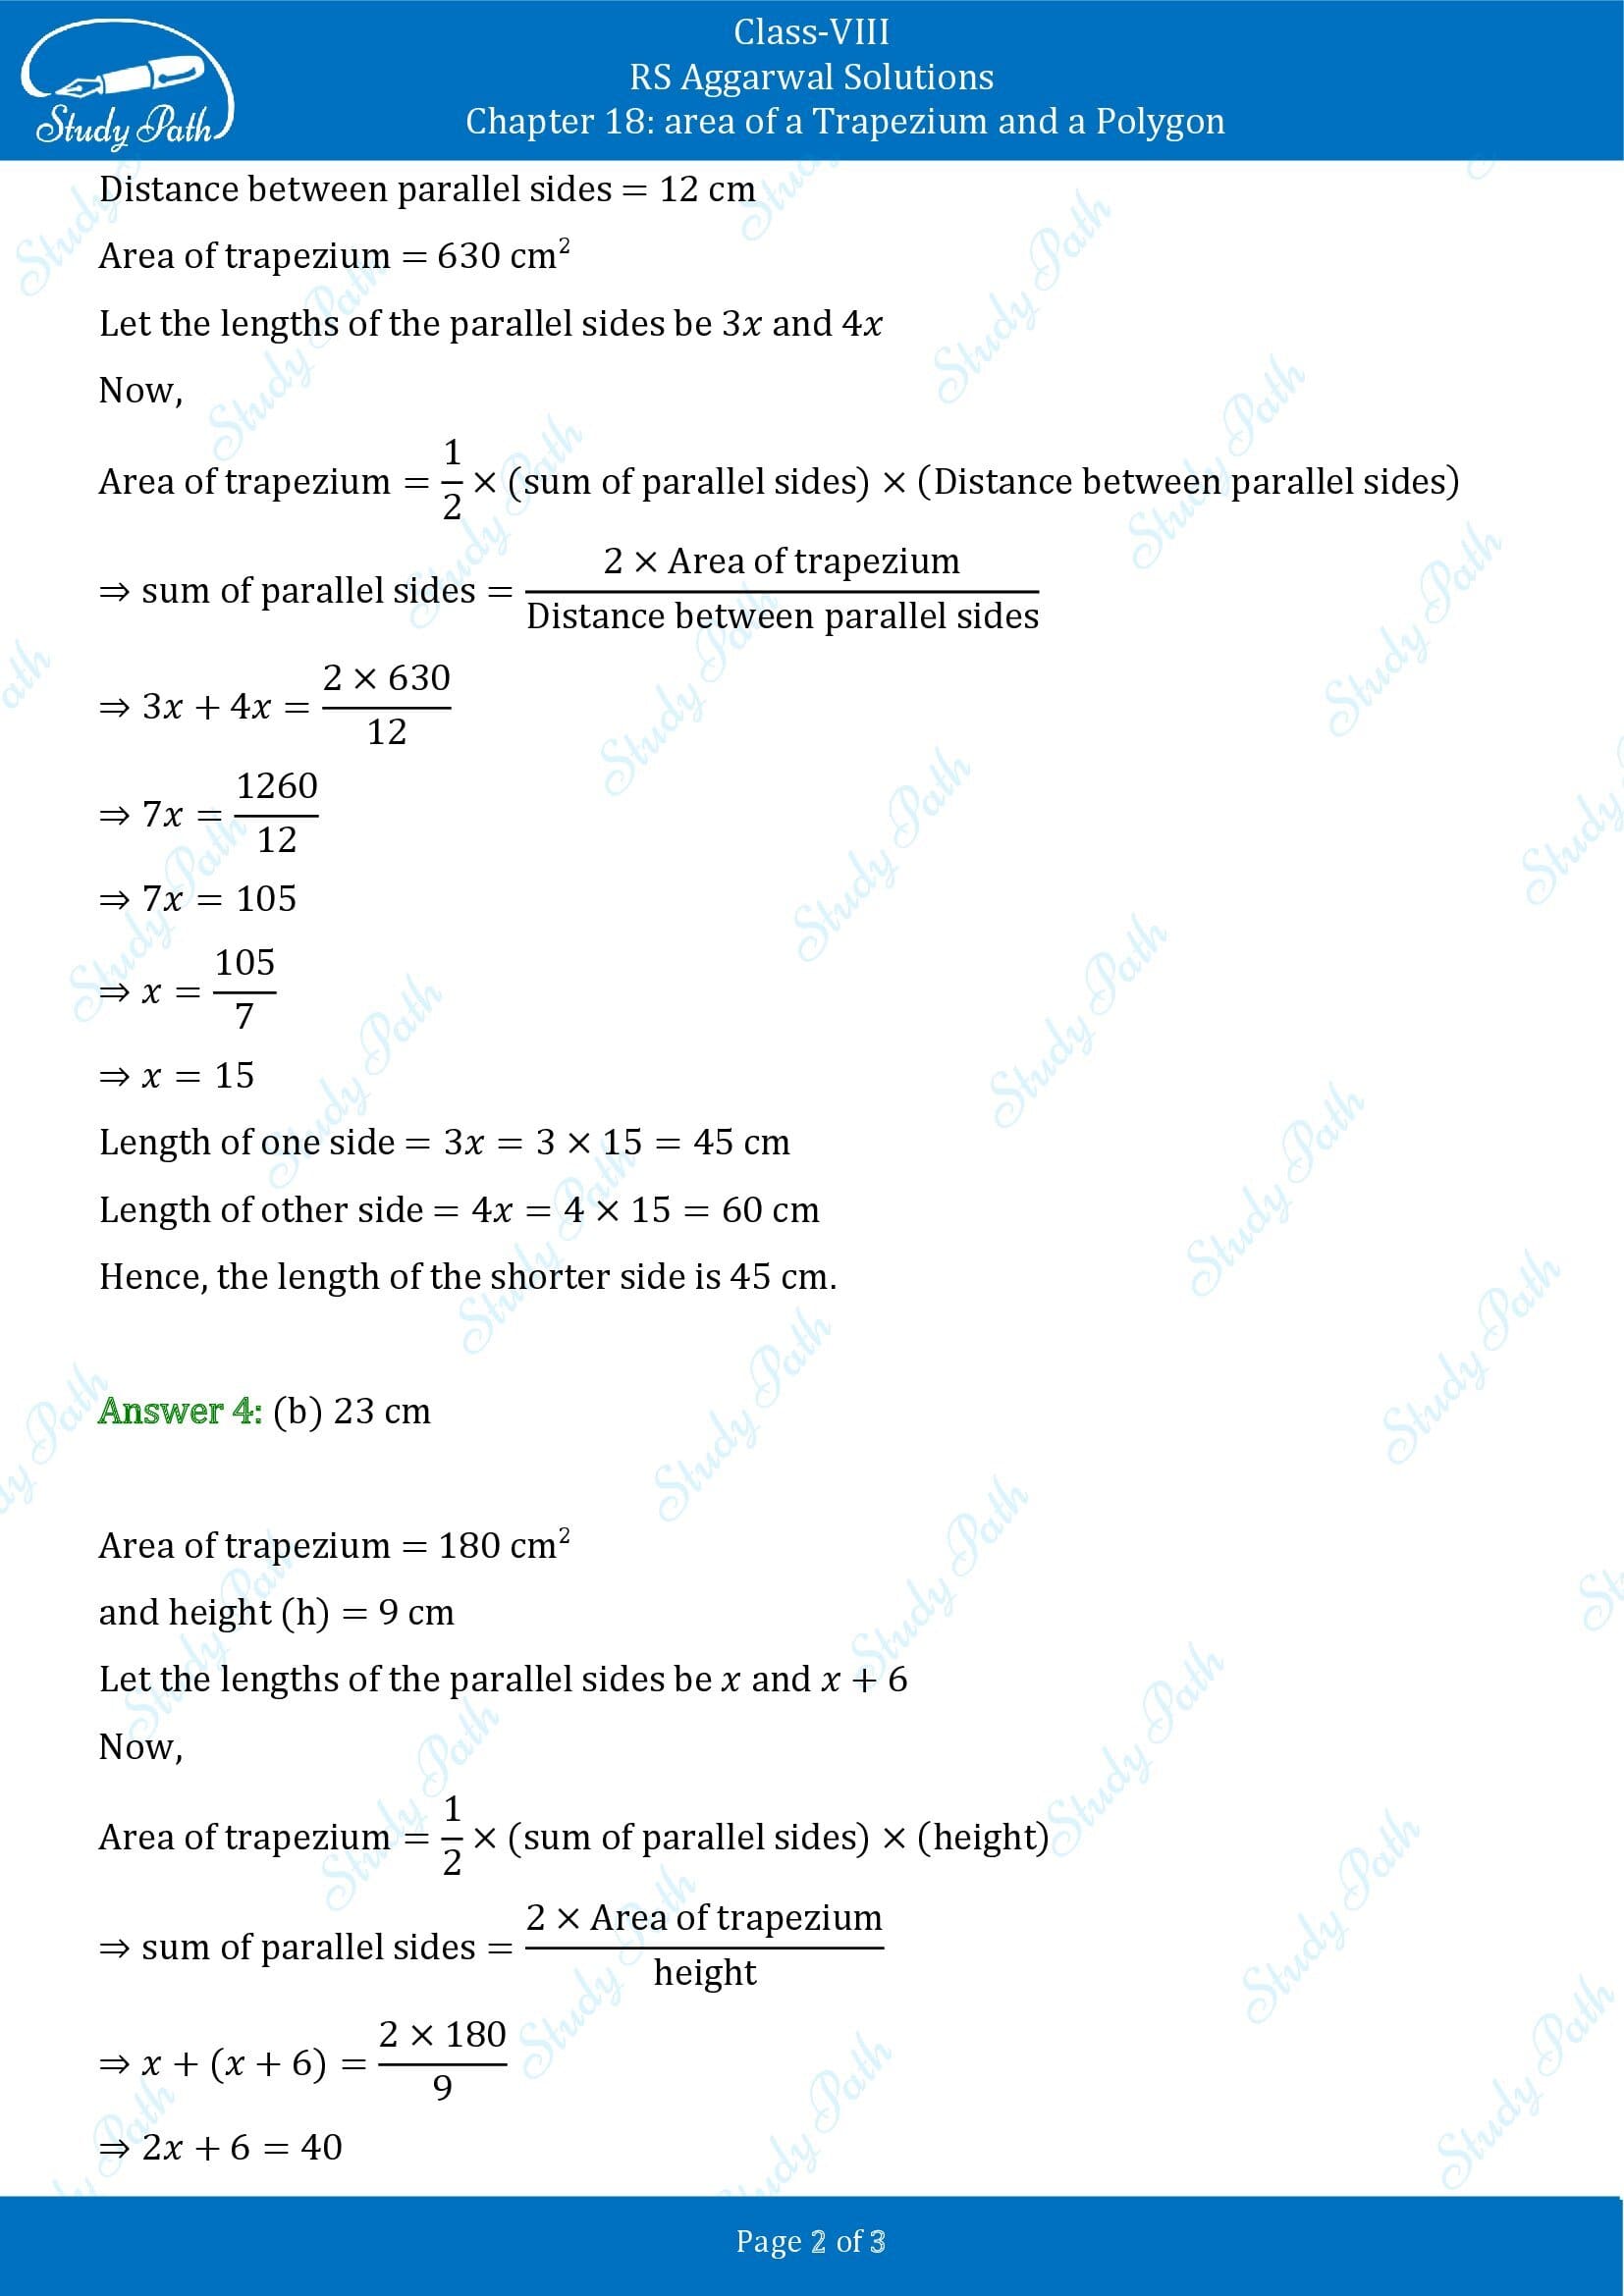 RS Aggarwal Solutions Class 8 Chapter 18 Area of a Trapezium and a Polygon Exercise 18C MCQs 00002